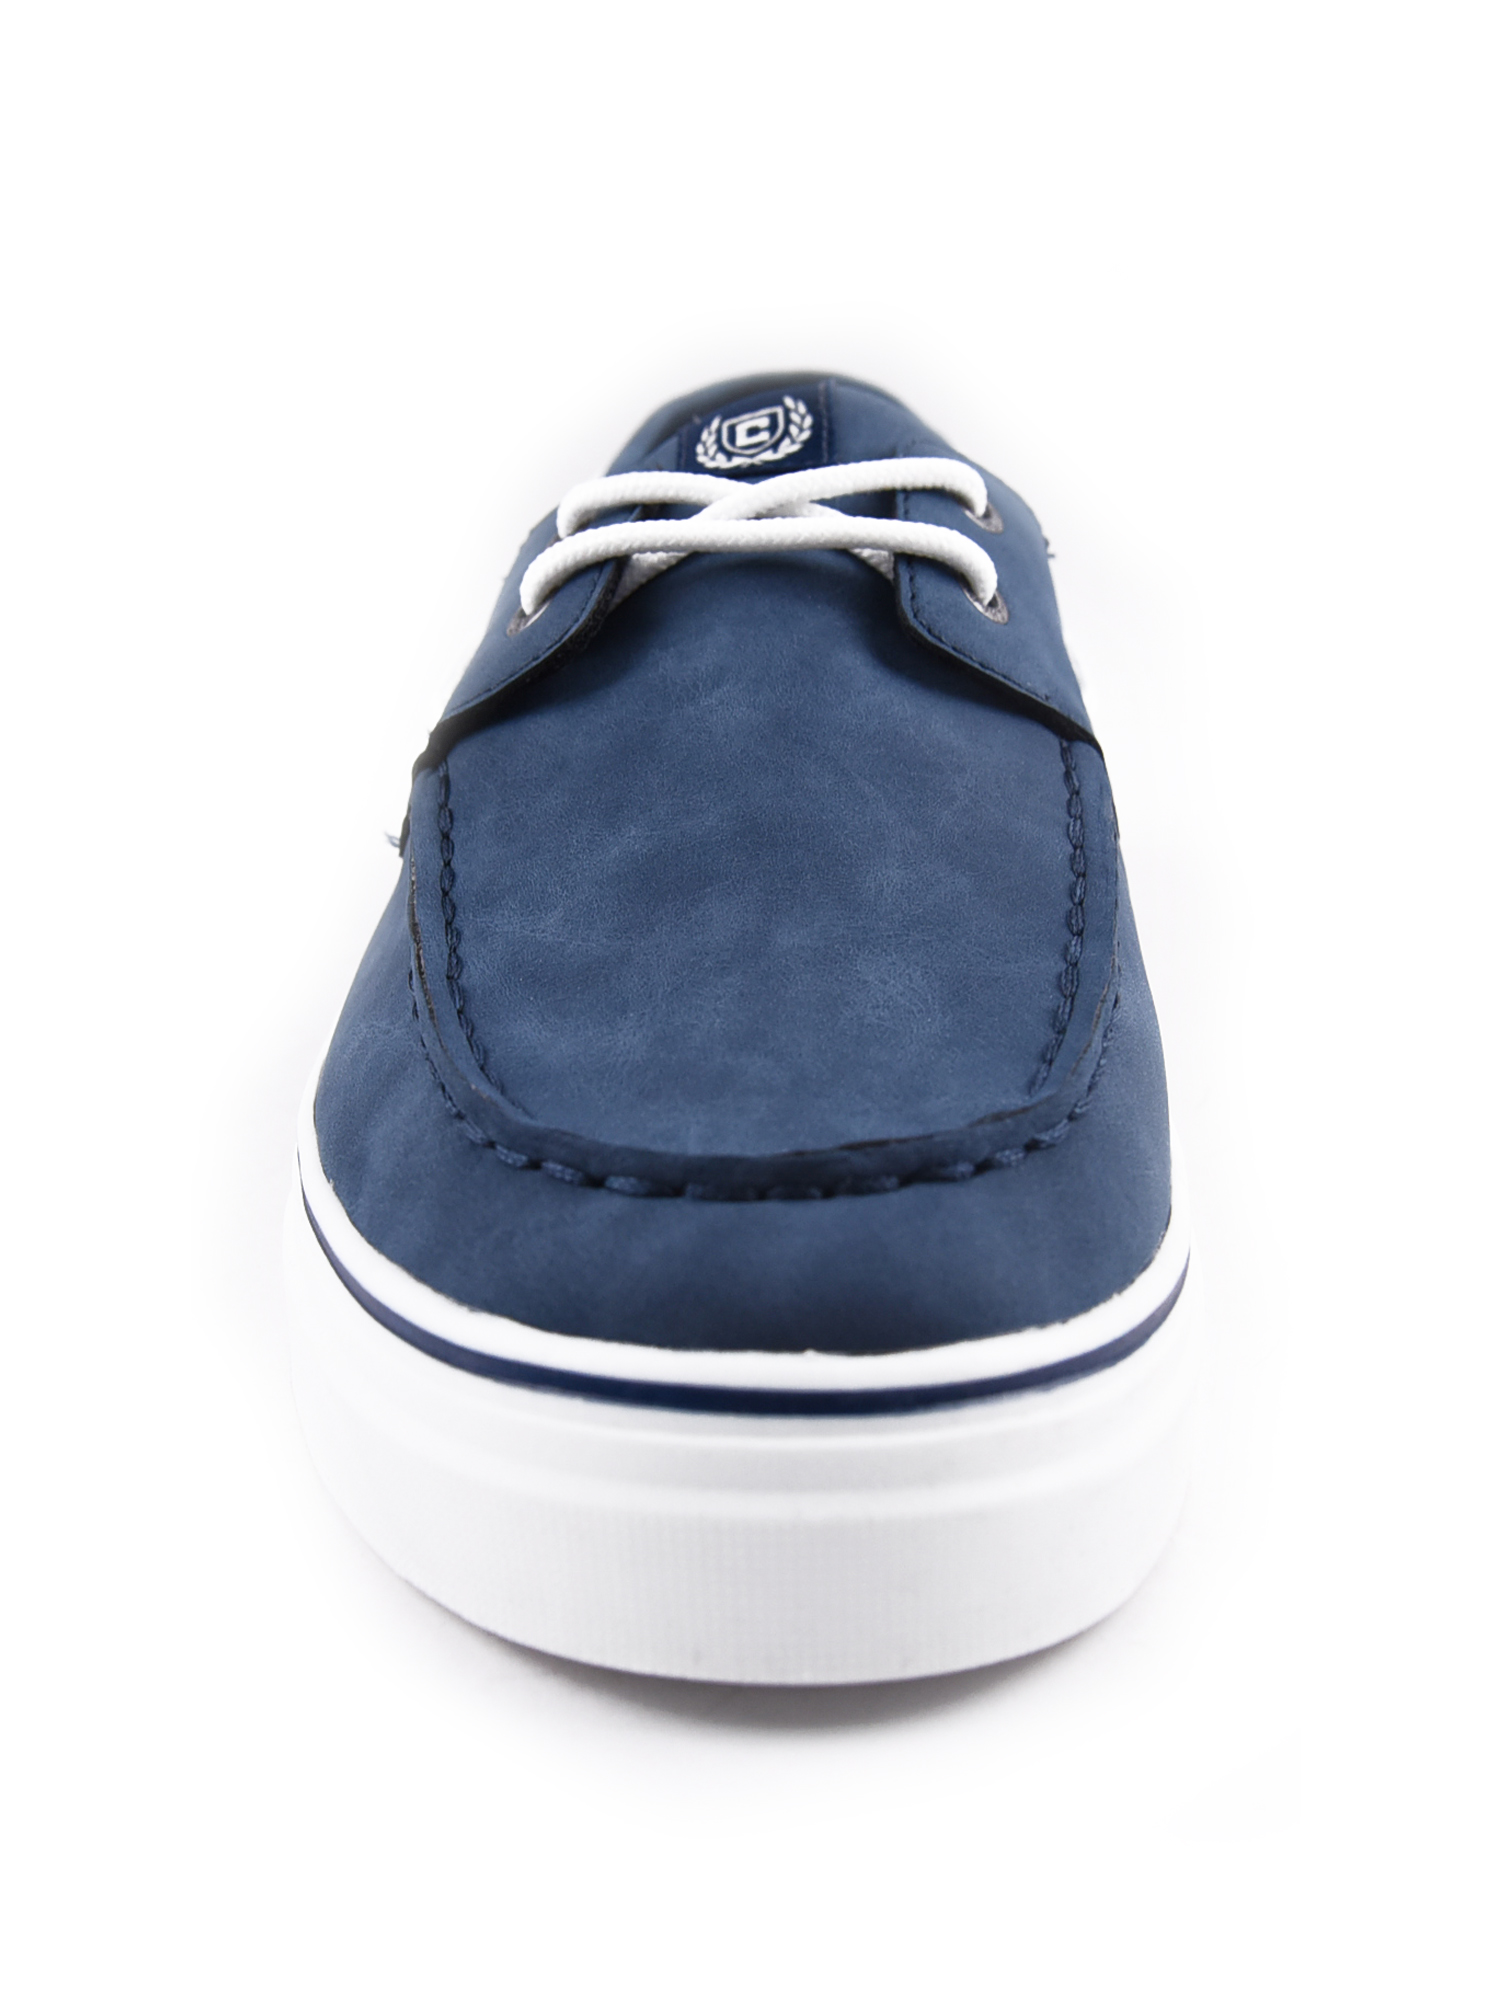 Chaps Mens Casual Dock Boat Shoe - image 4 of 7